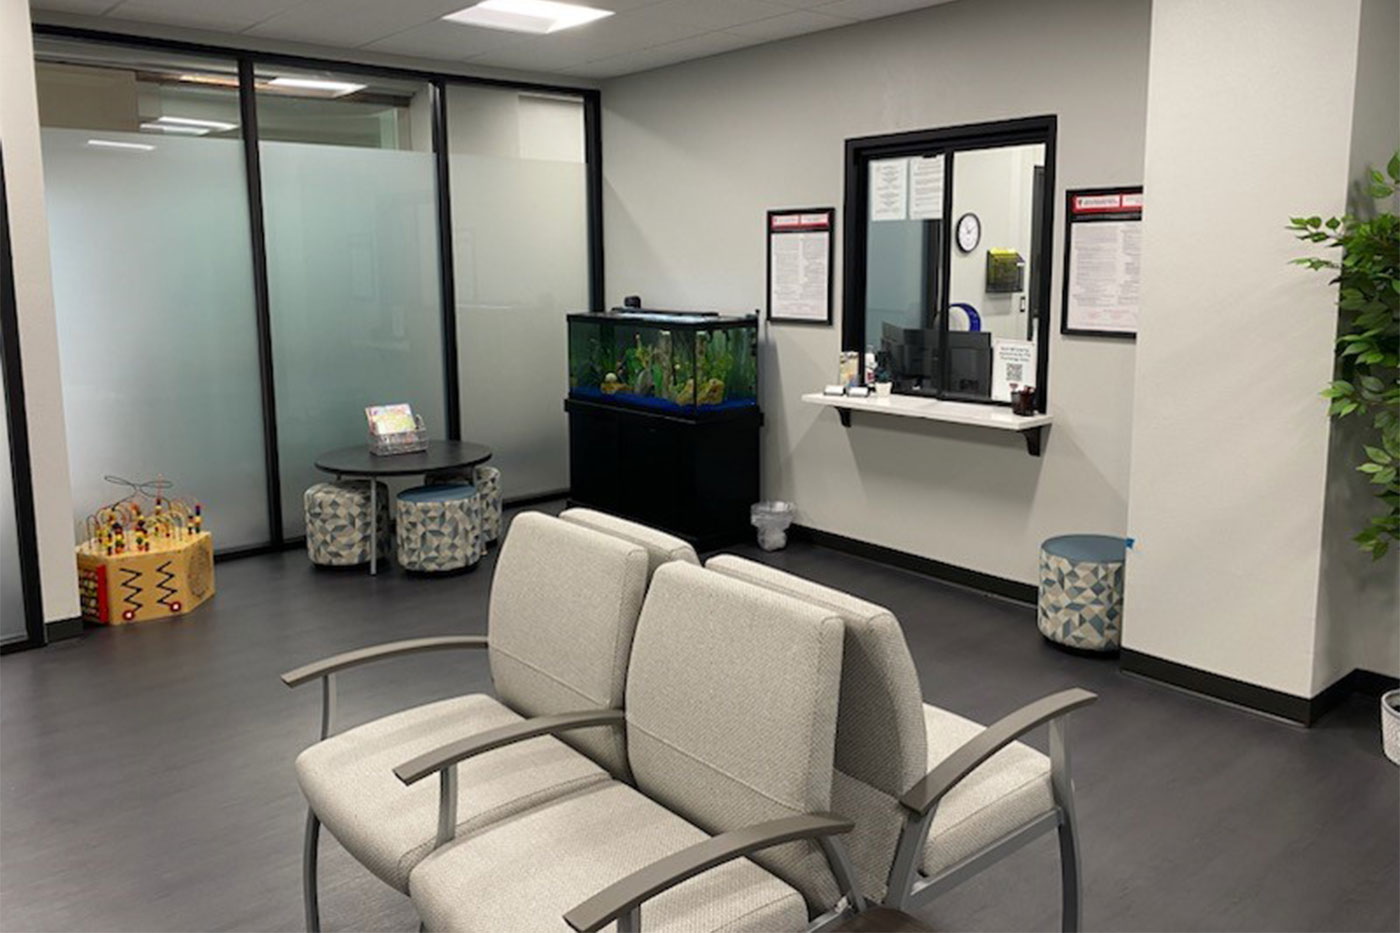 Psychology clinic lobby with check-in window